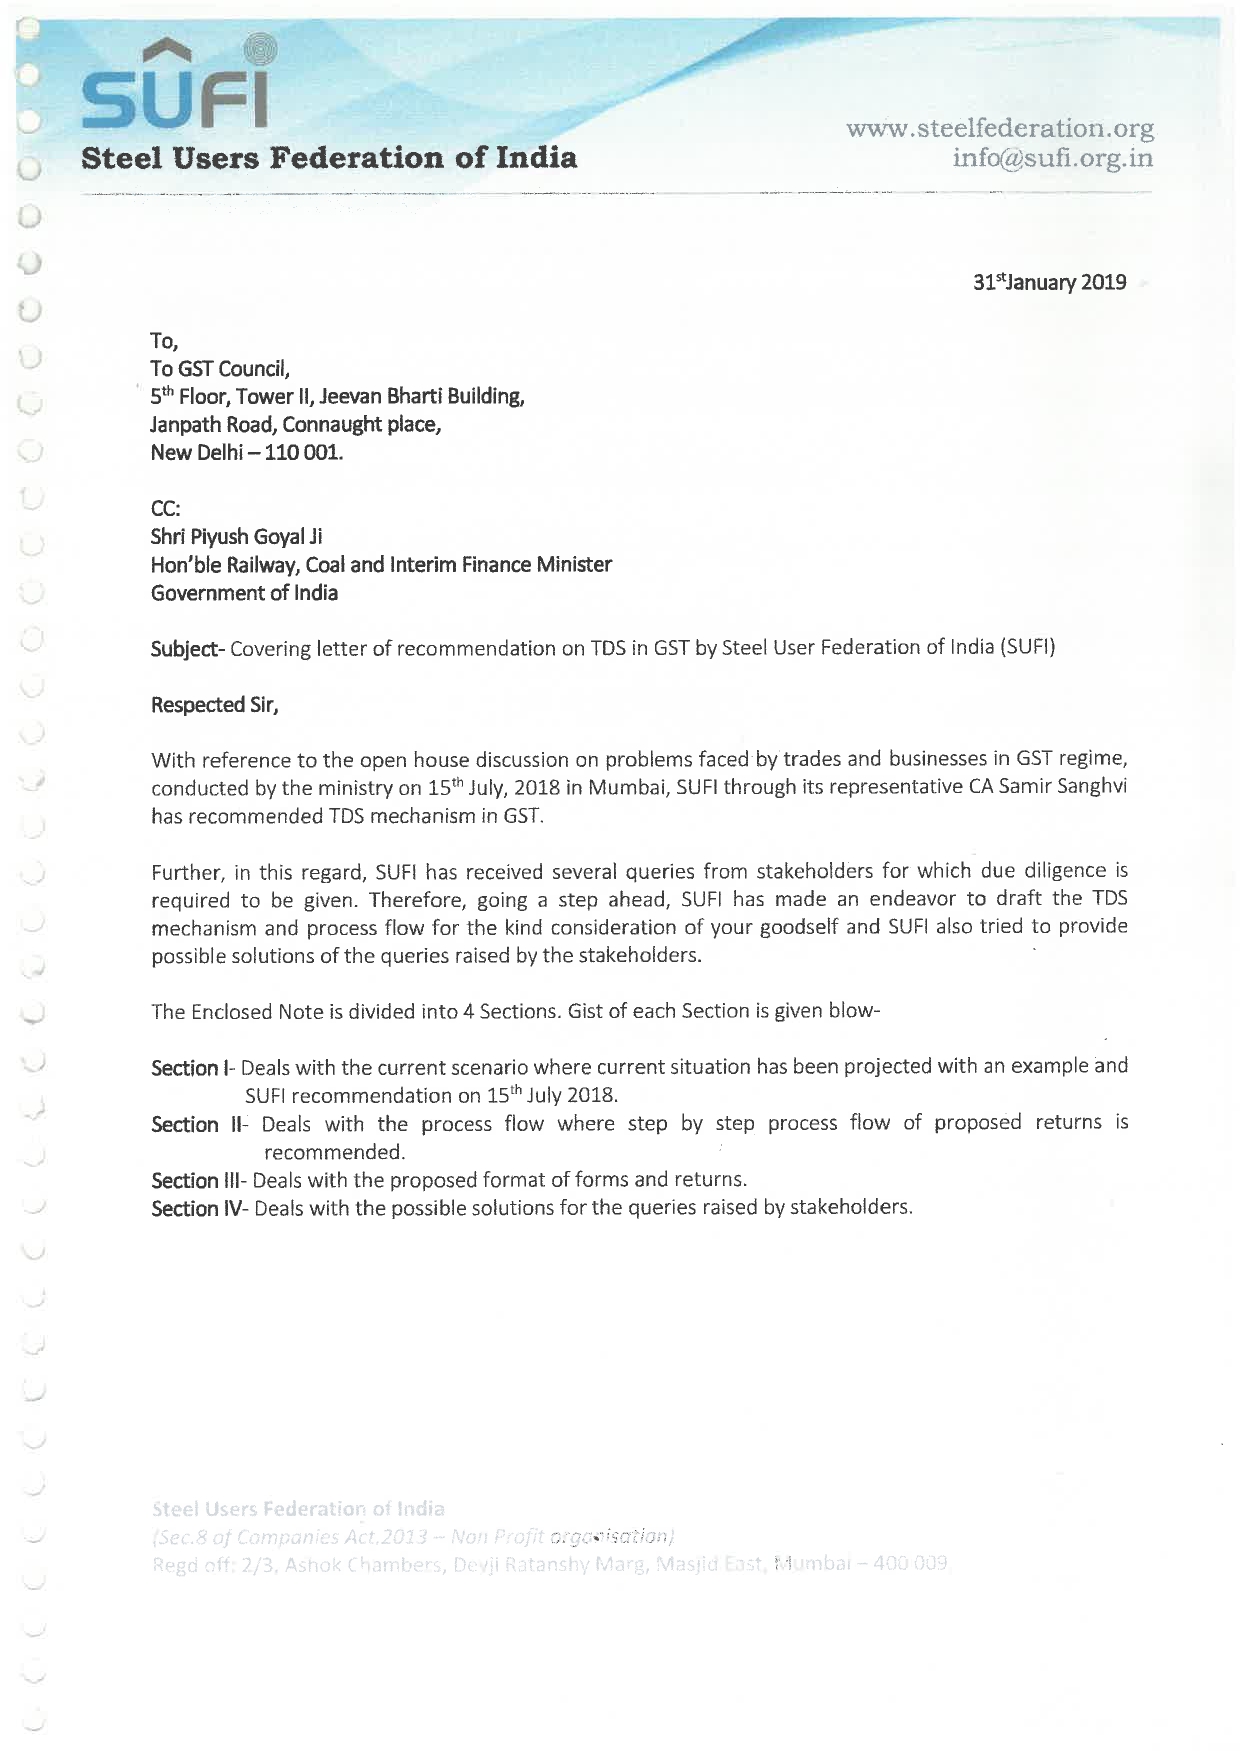 Letter to the GST Council – Recommendation on TDS in GST